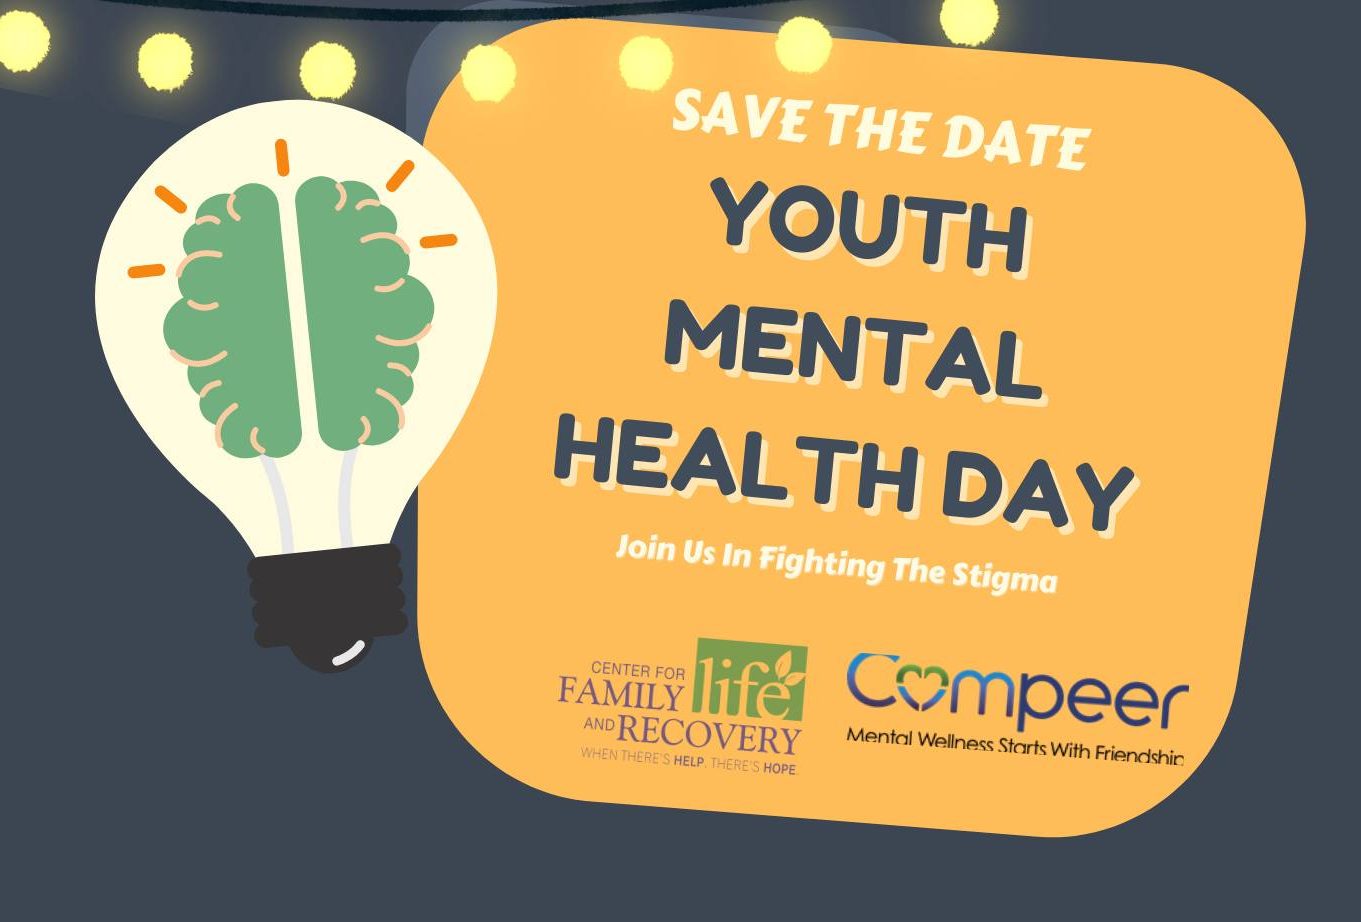 2nd Annual Youth Mental Health Day Scheduled for June 26th